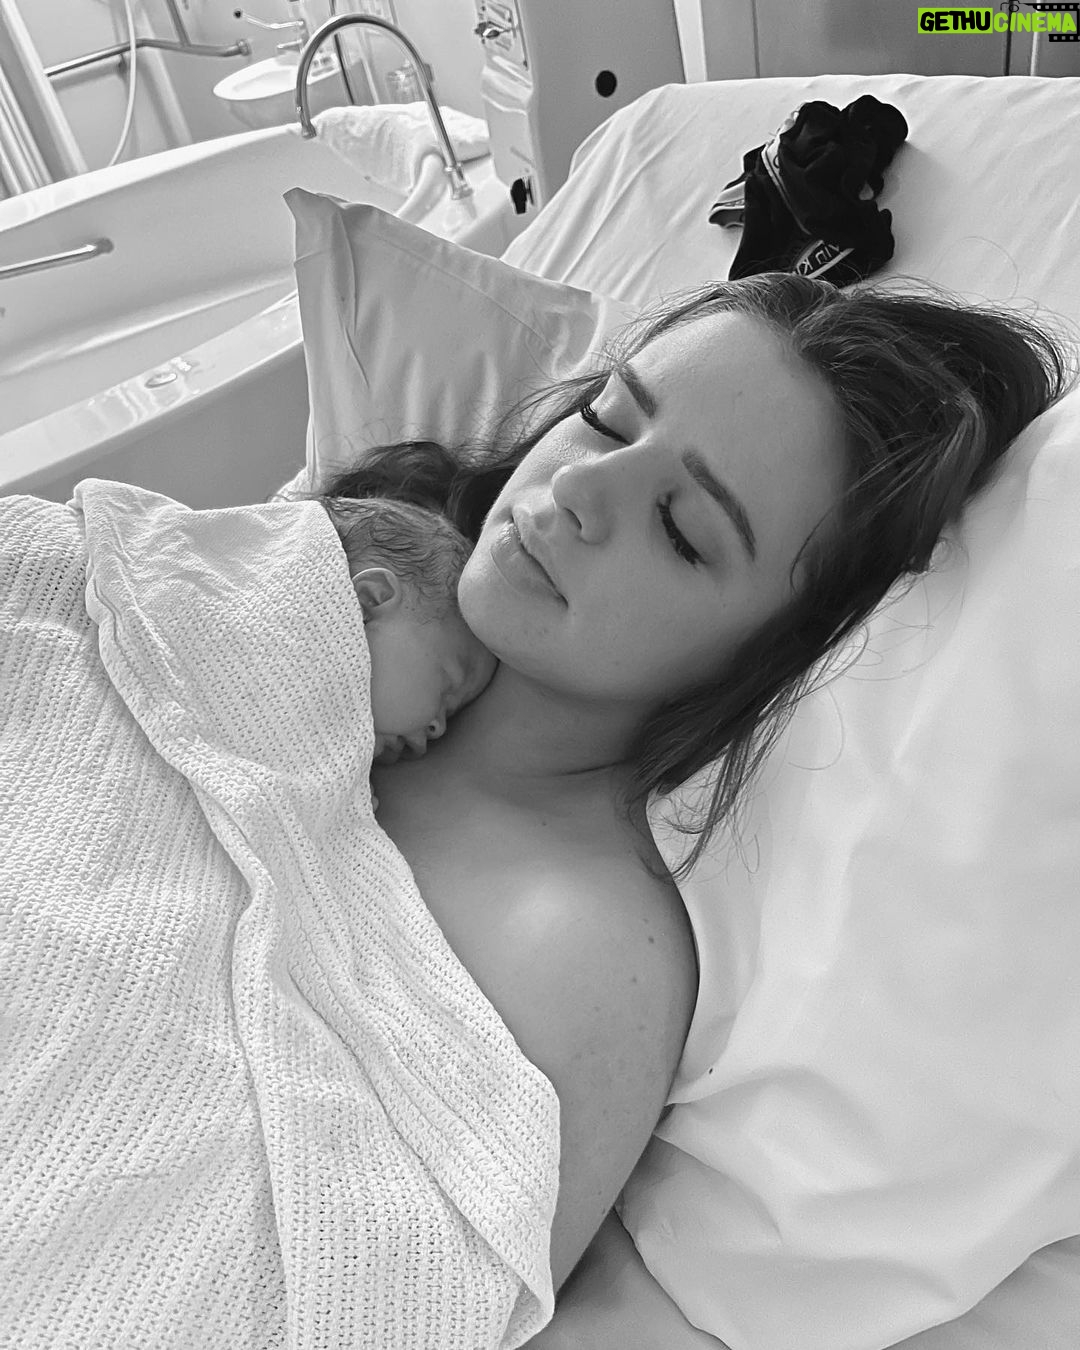 Jess Conte Wiki Biography Age Gallery Spouse And More